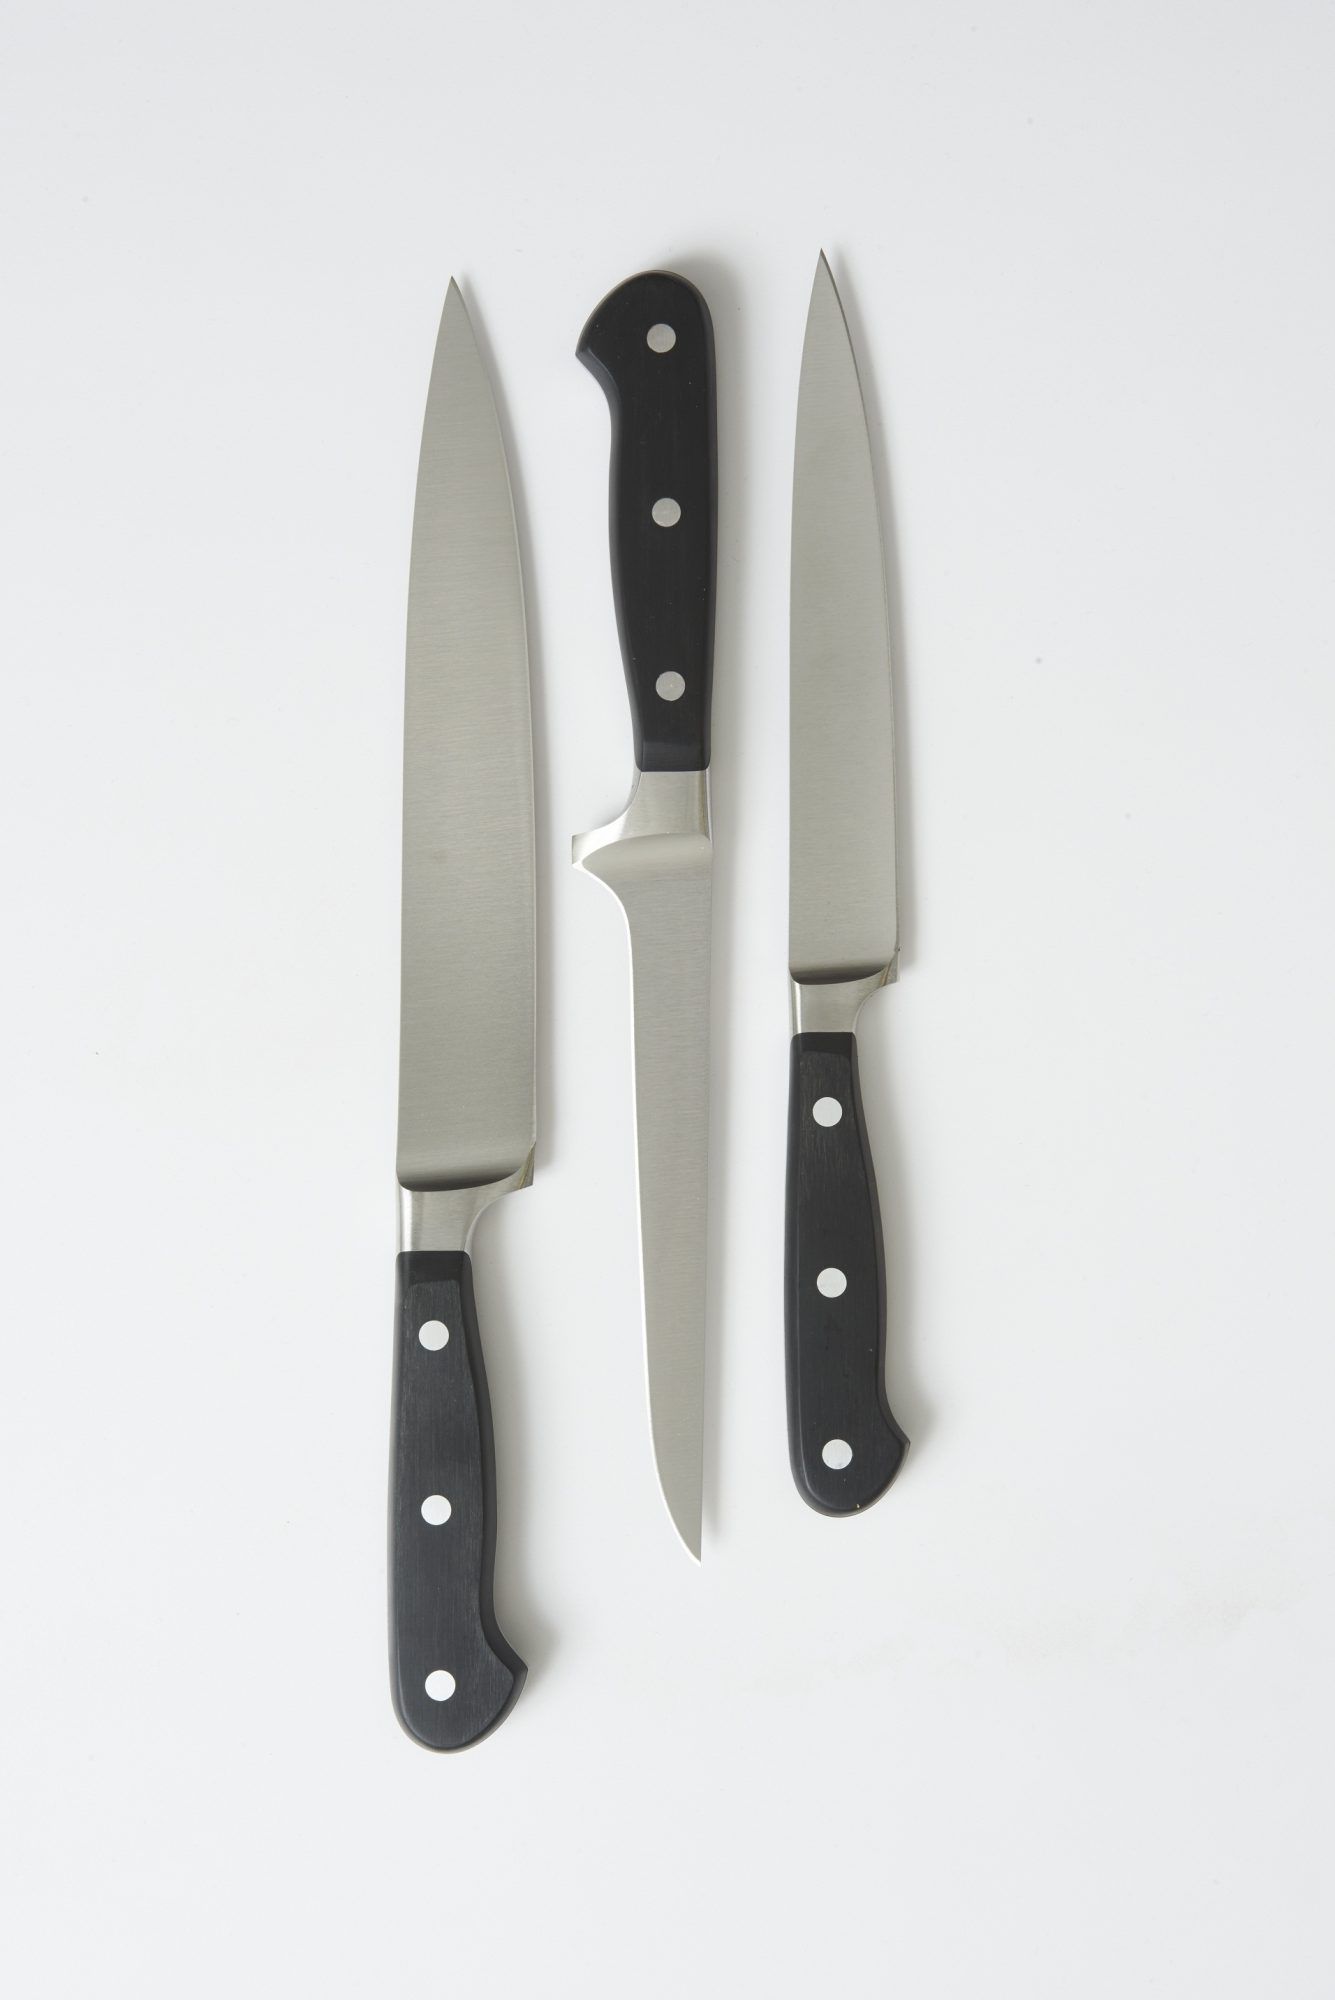 How To Buy The Best Kitchen Knives Allrecipes